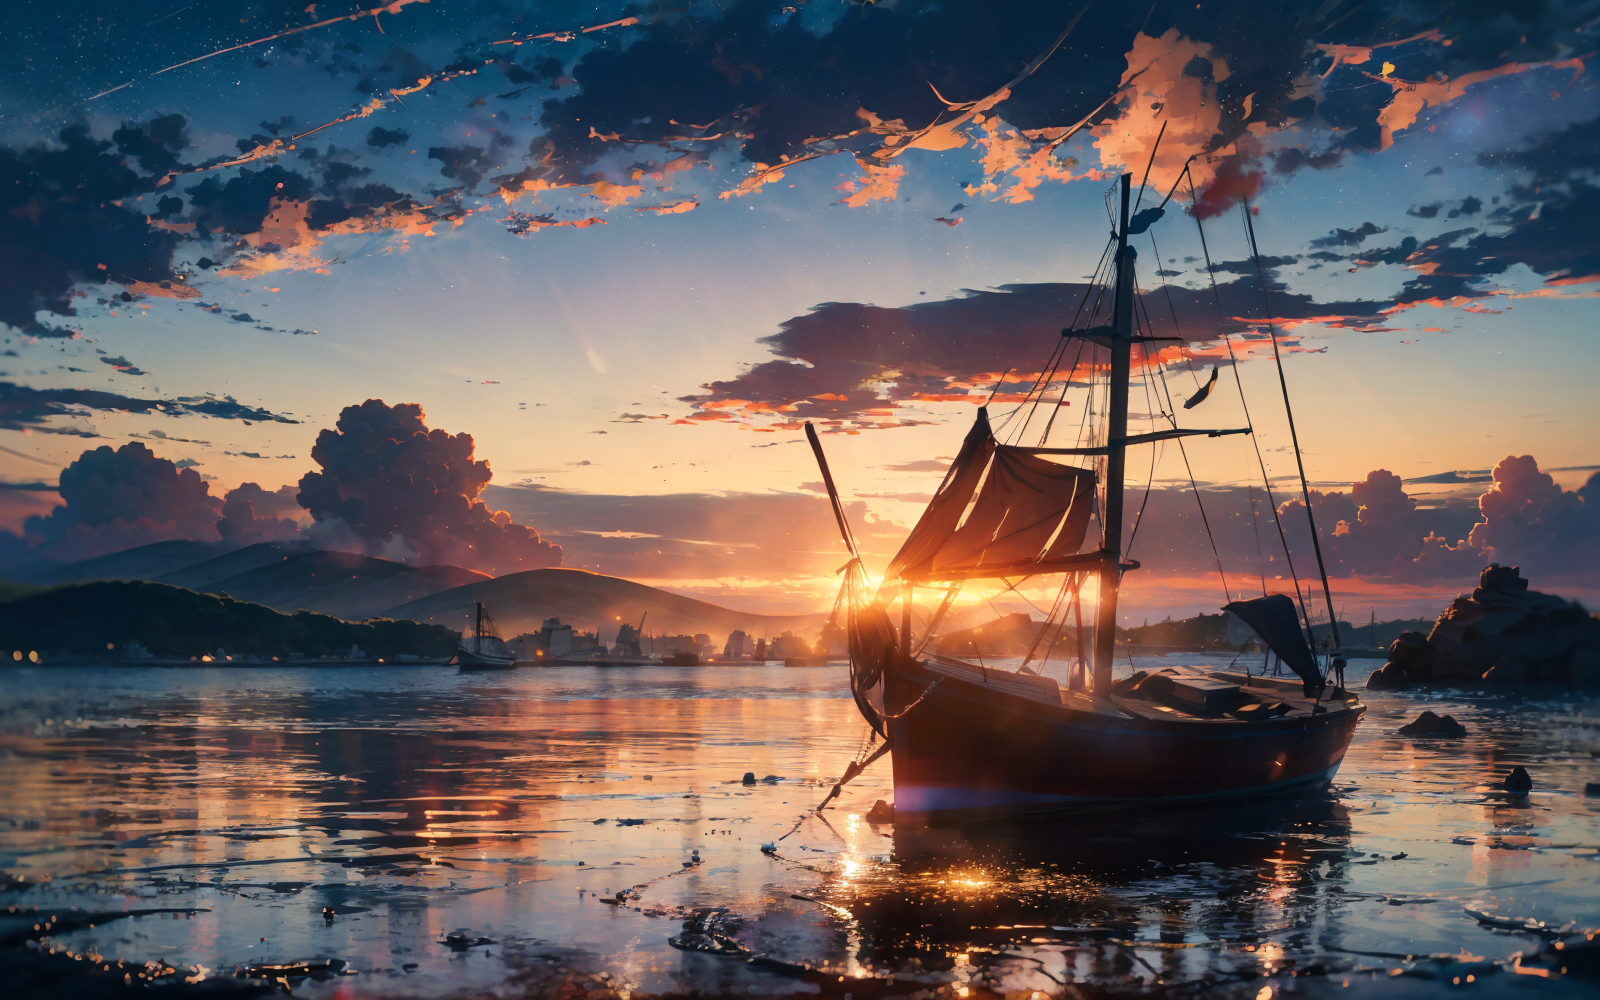 02356-2153989705-no humans,Pure Scene,Evening,Sunset,Ocean,The Middle Ages,Sailboat,Navigation,A distant island.,Sparkling water,Sunset afterglow.png